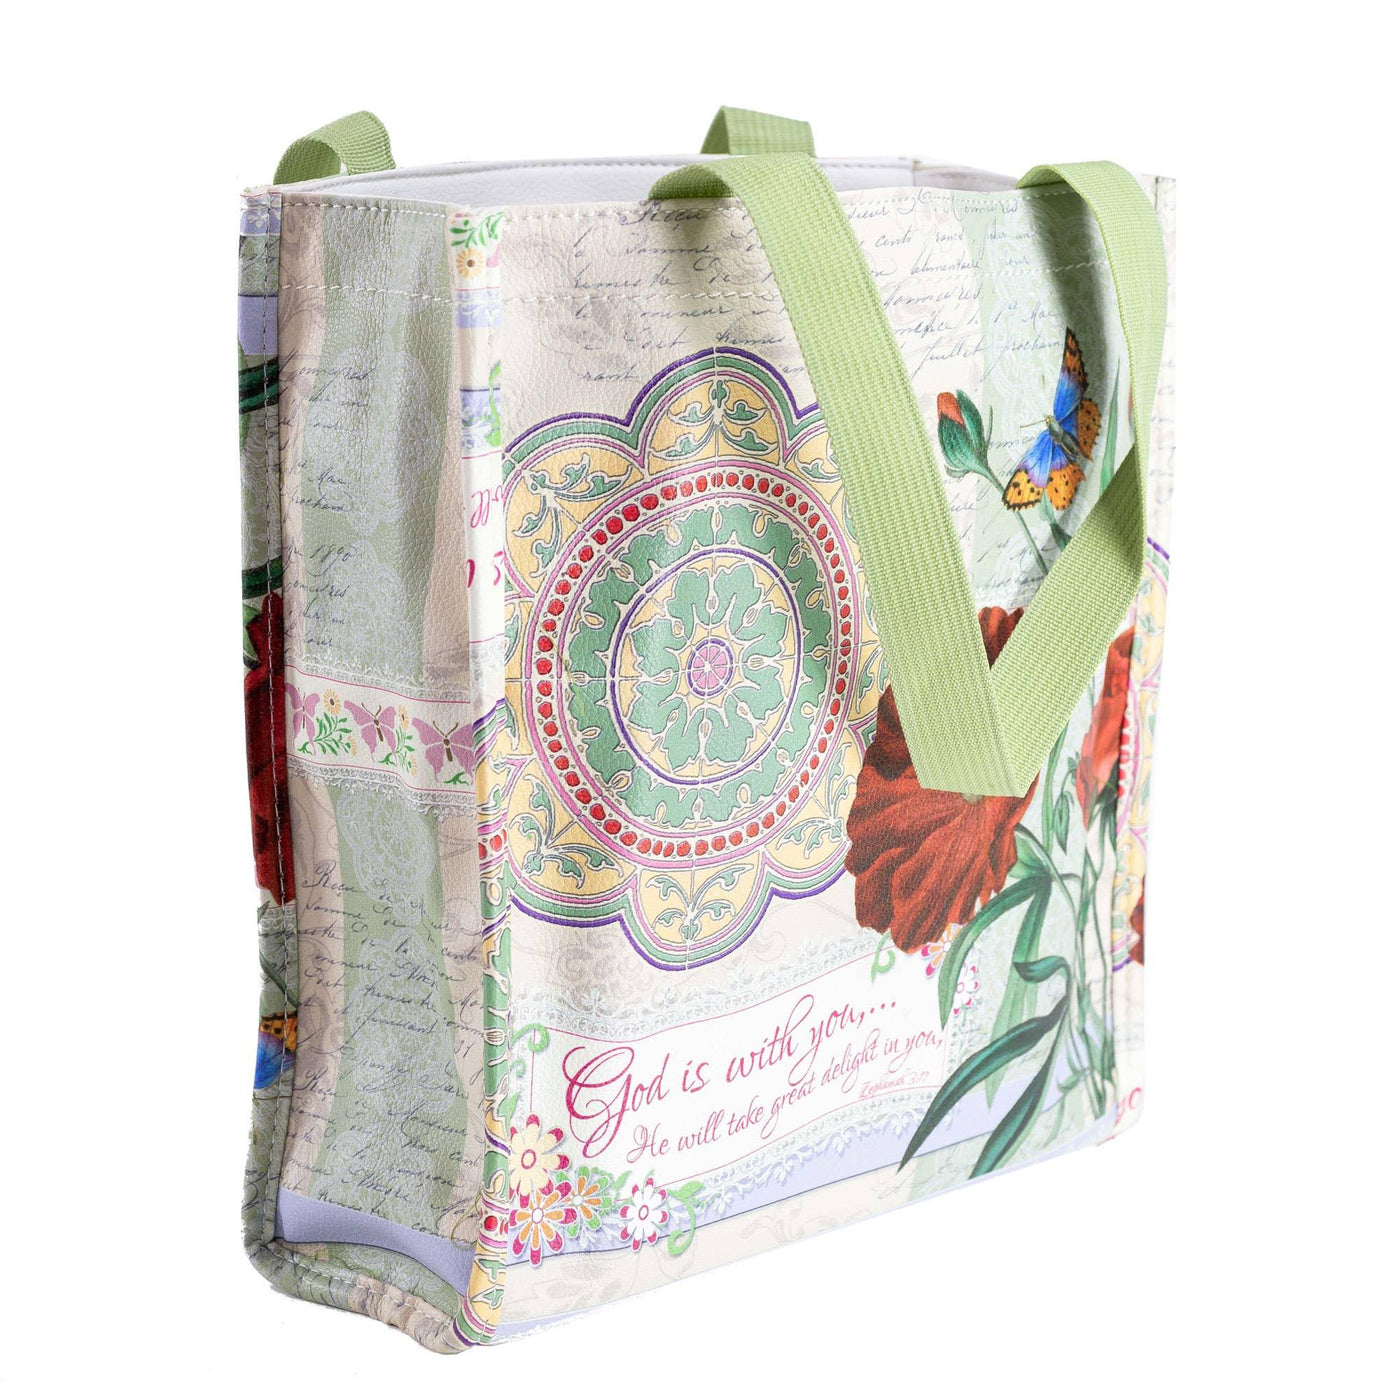 Beautiful multicolored tote bag with green straps and "God is with you... He will take great delight in you" printed on the front right corner